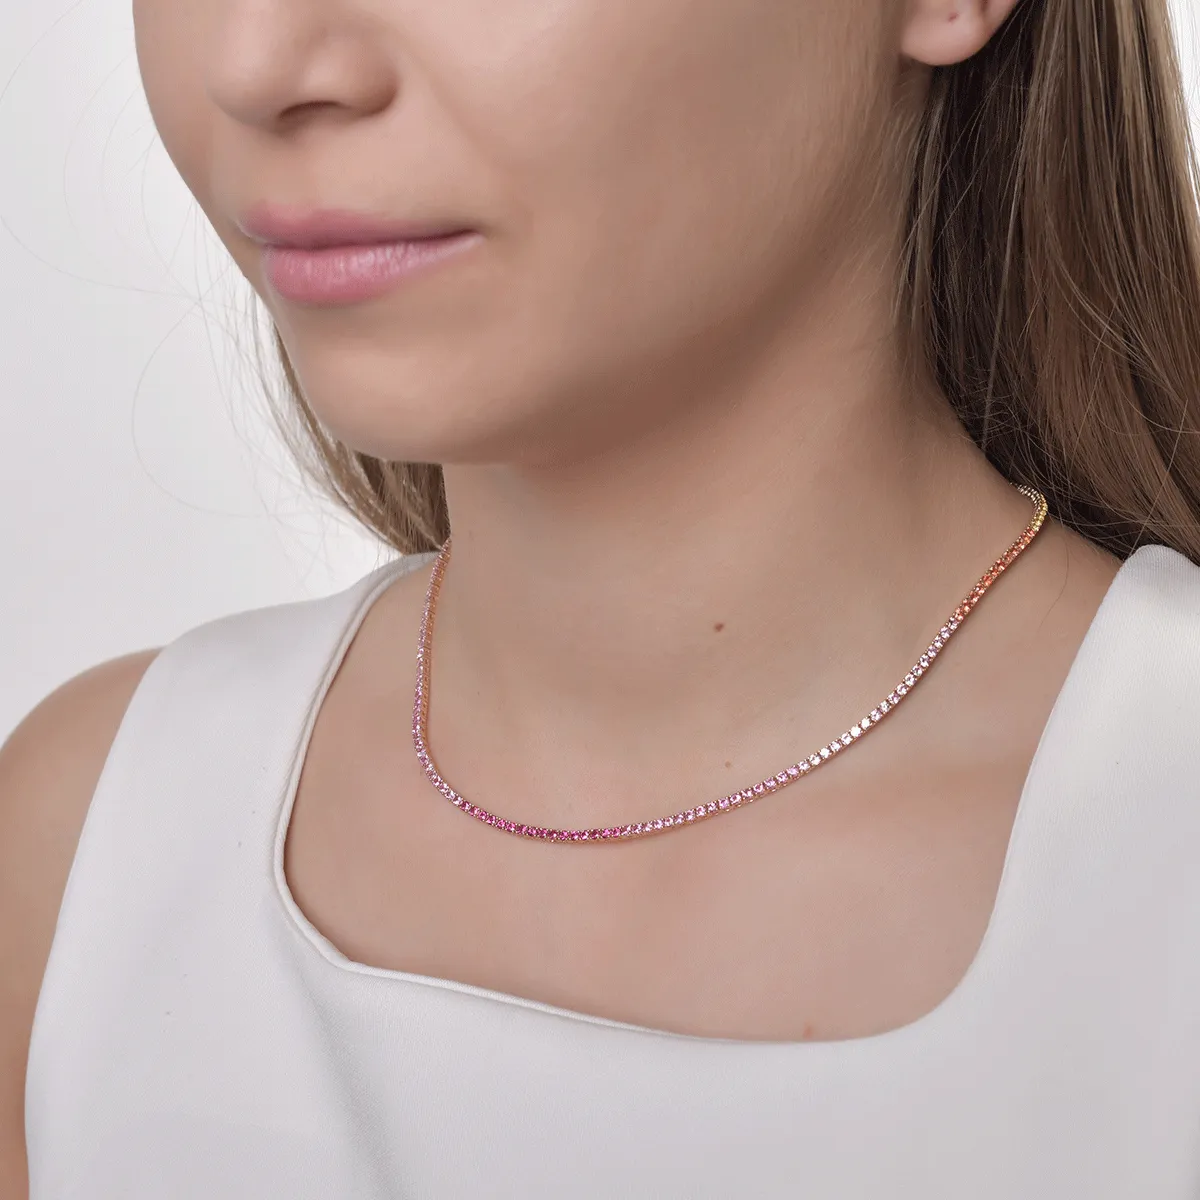 18K rose gold tennis necklace with 7.6ct multicolored sapphires